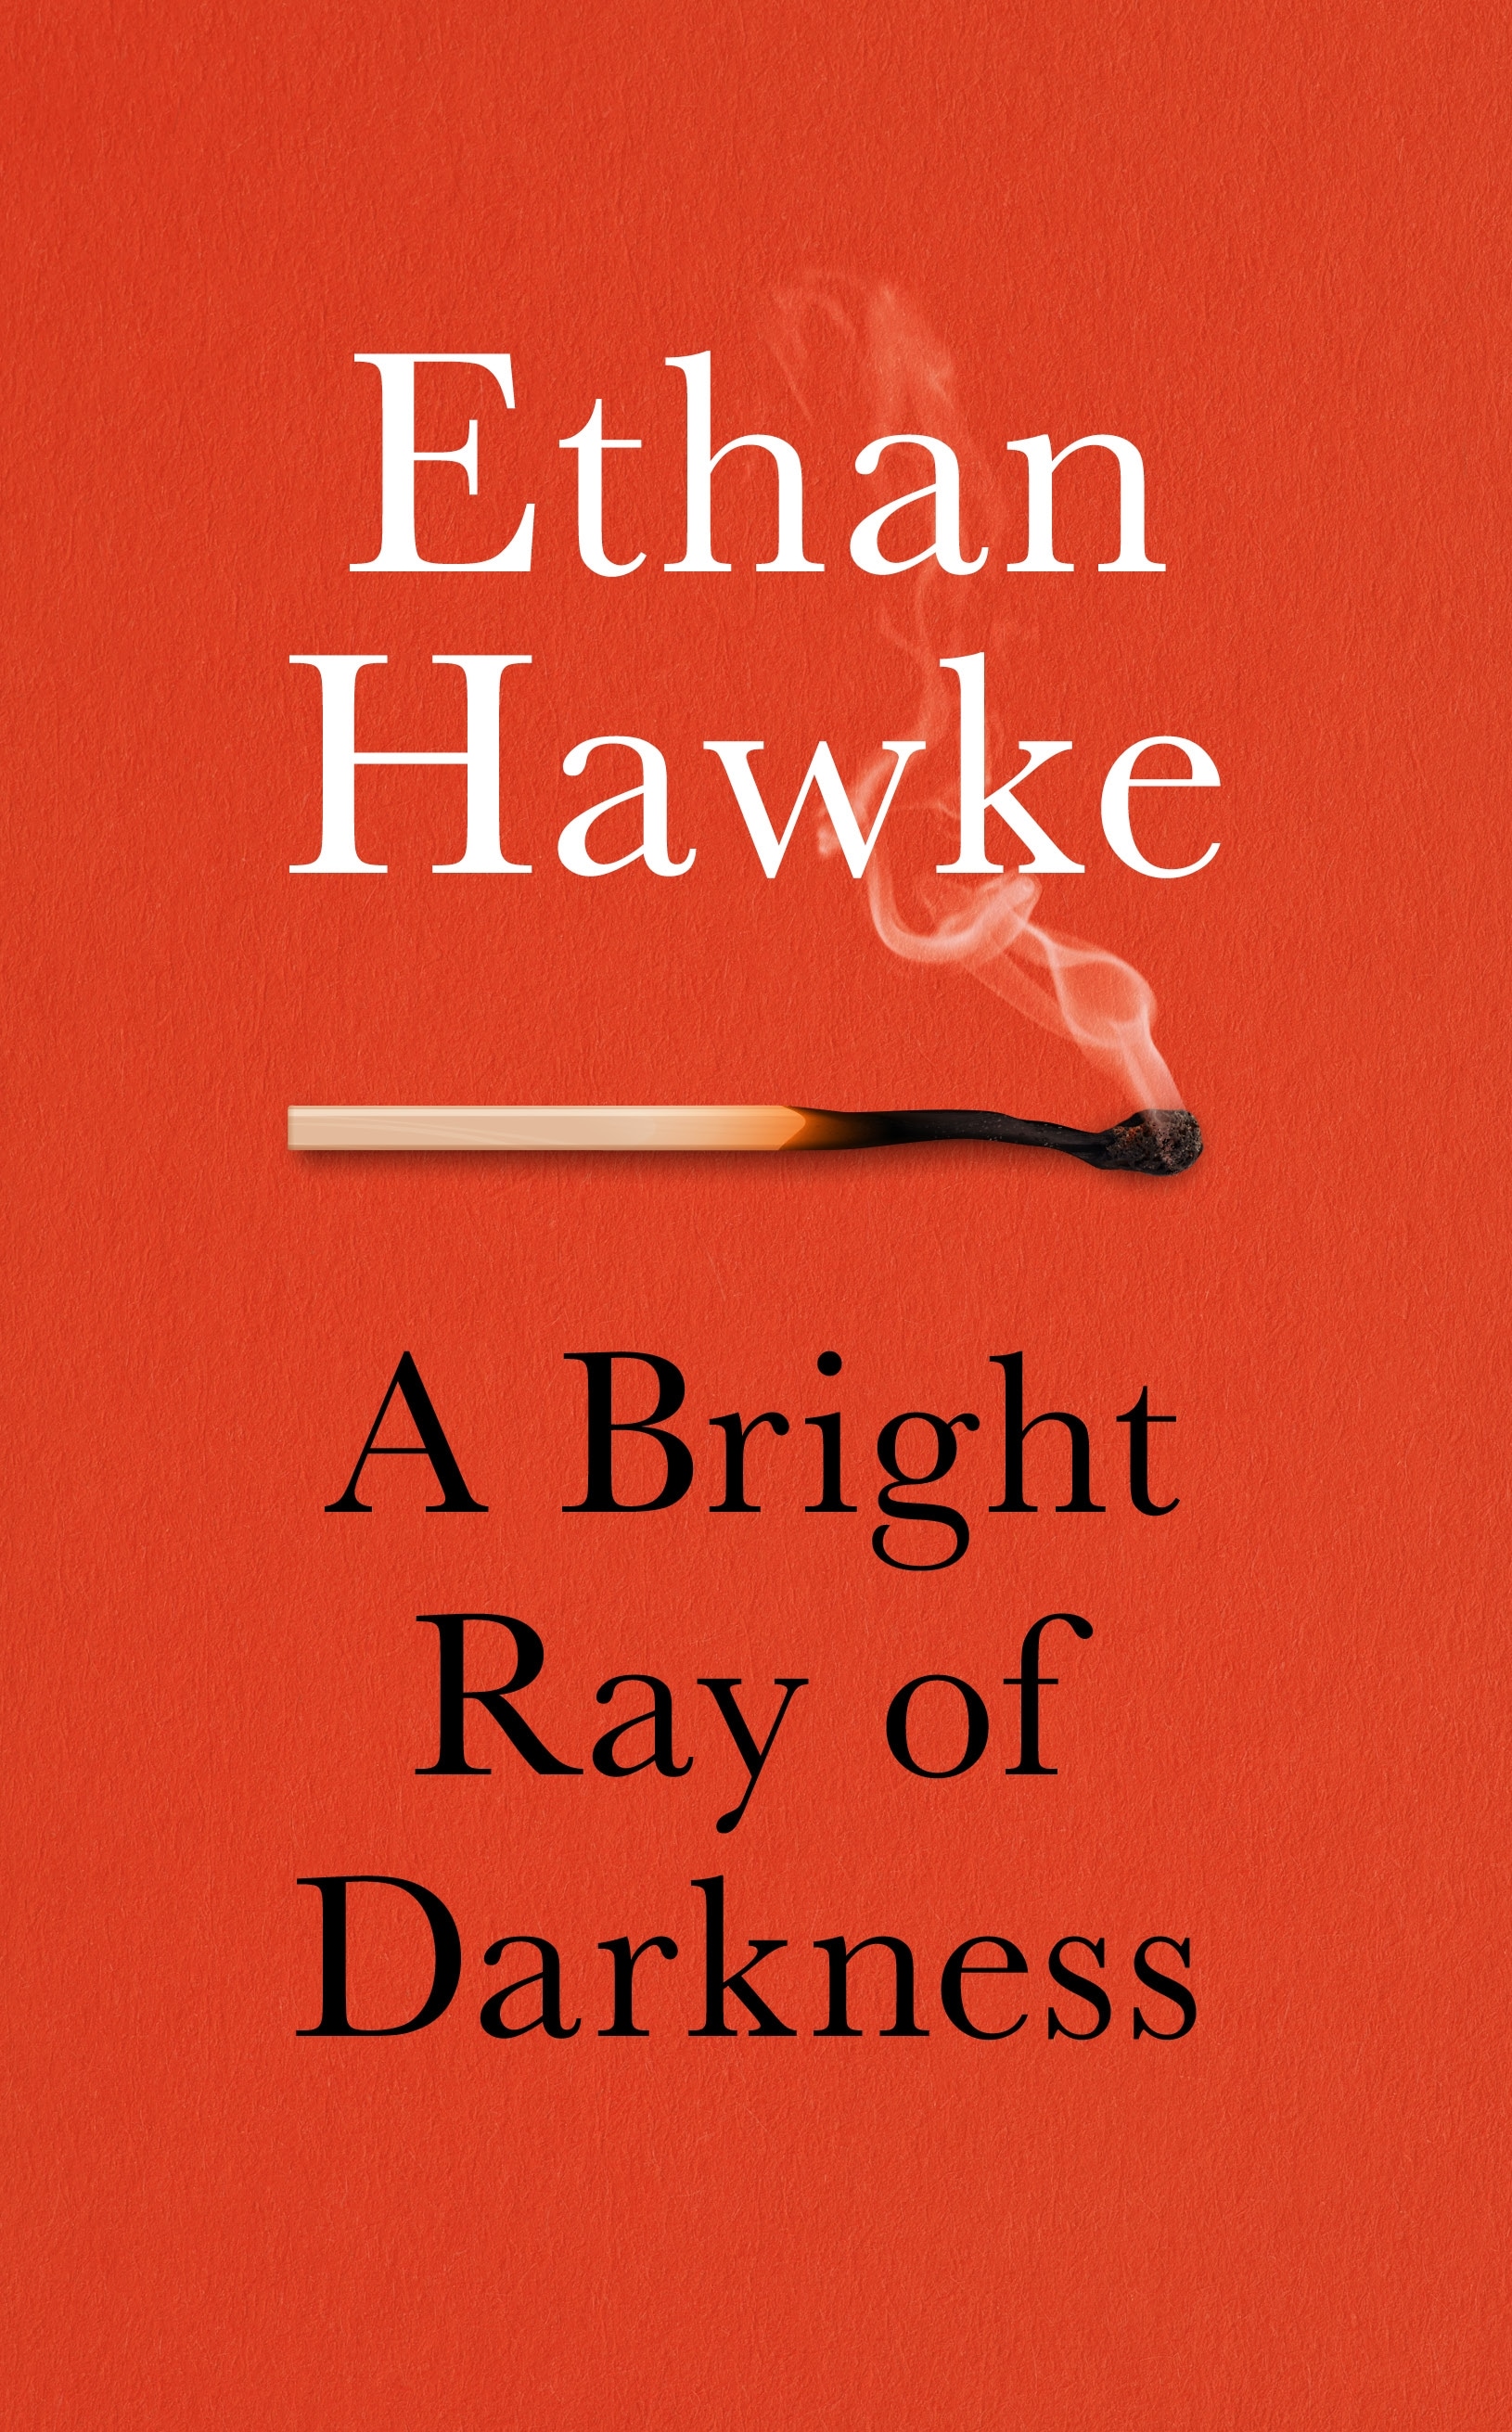 Book “A Bright Ray of Darkness” by Ethan Hawke — February 2, 2021